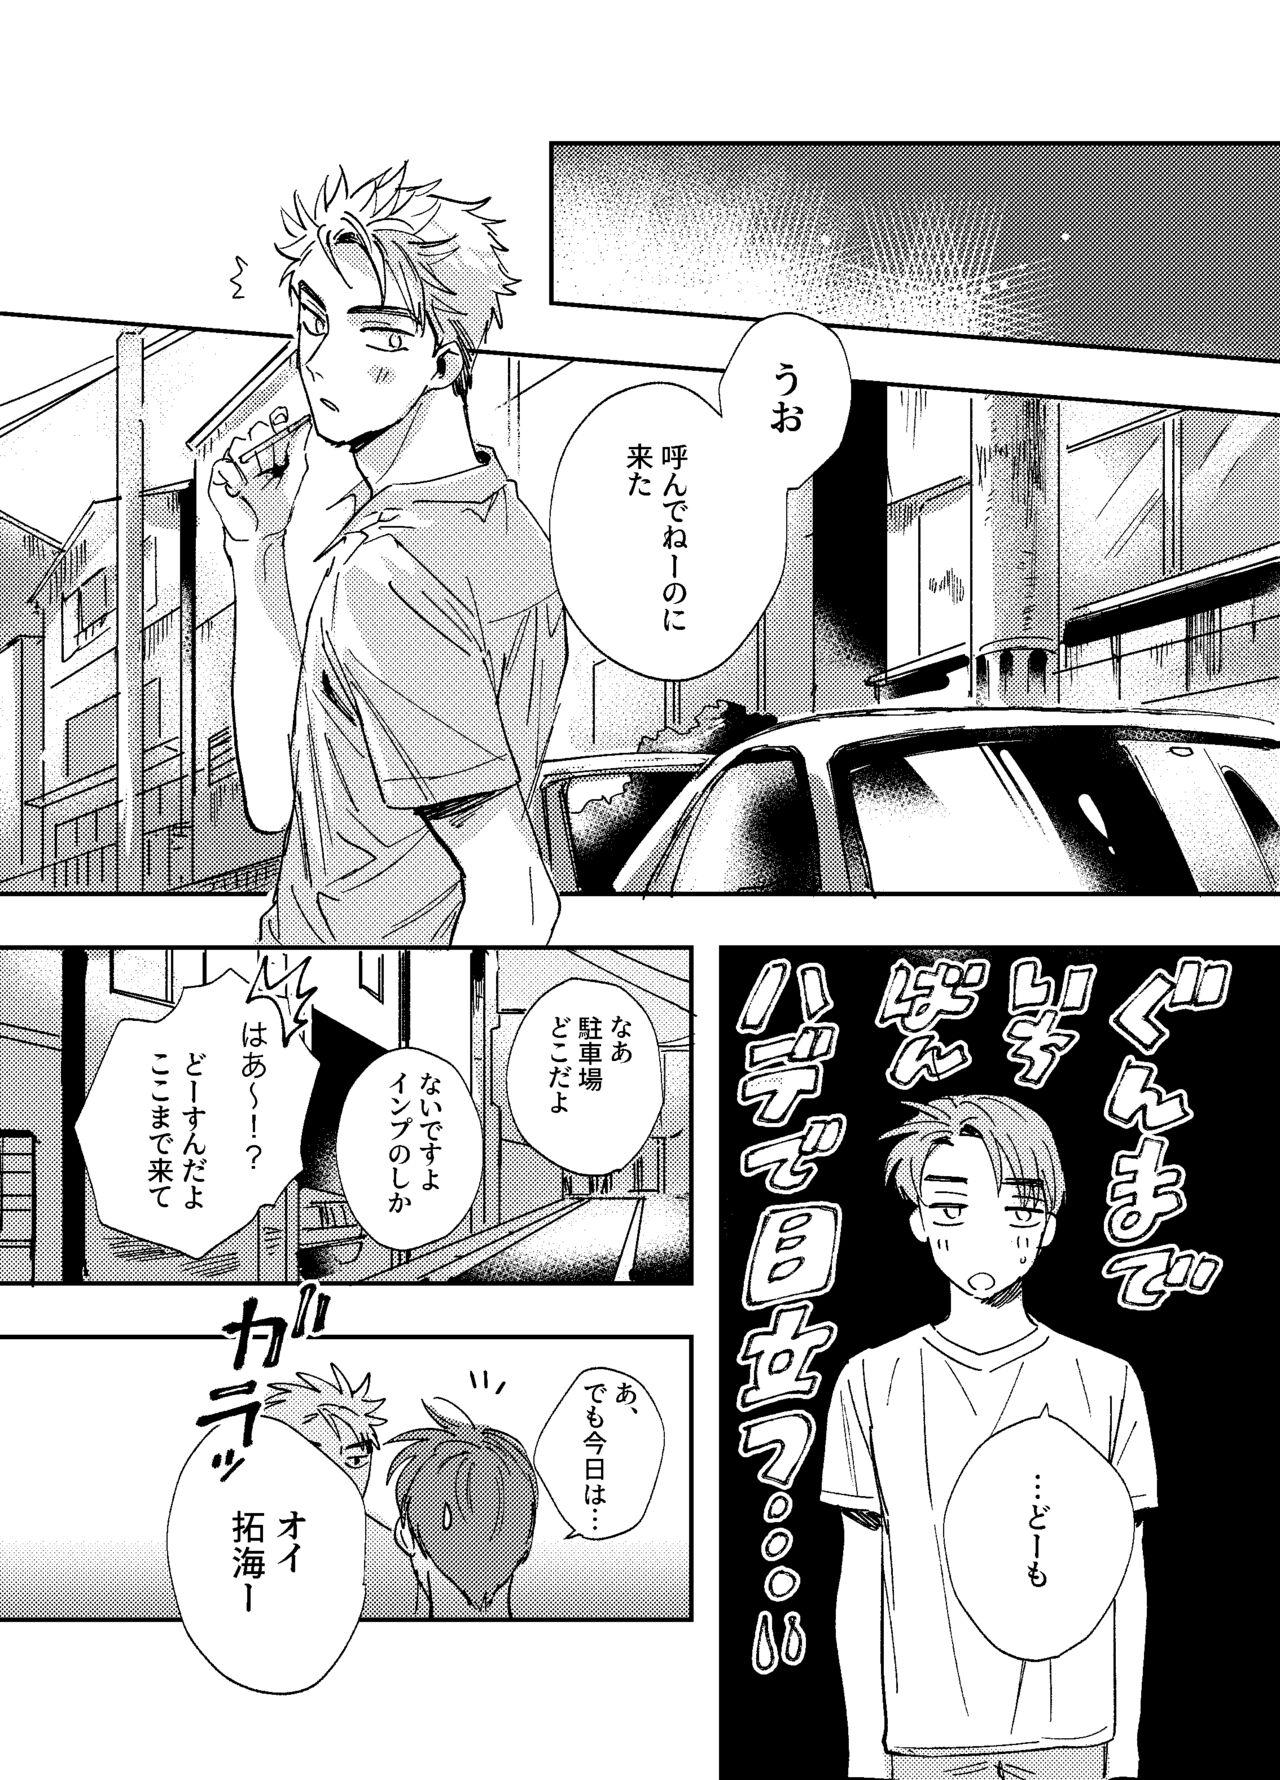 Pov Blow Job more than stars, more than you. - Initial d Infiel - Page 7